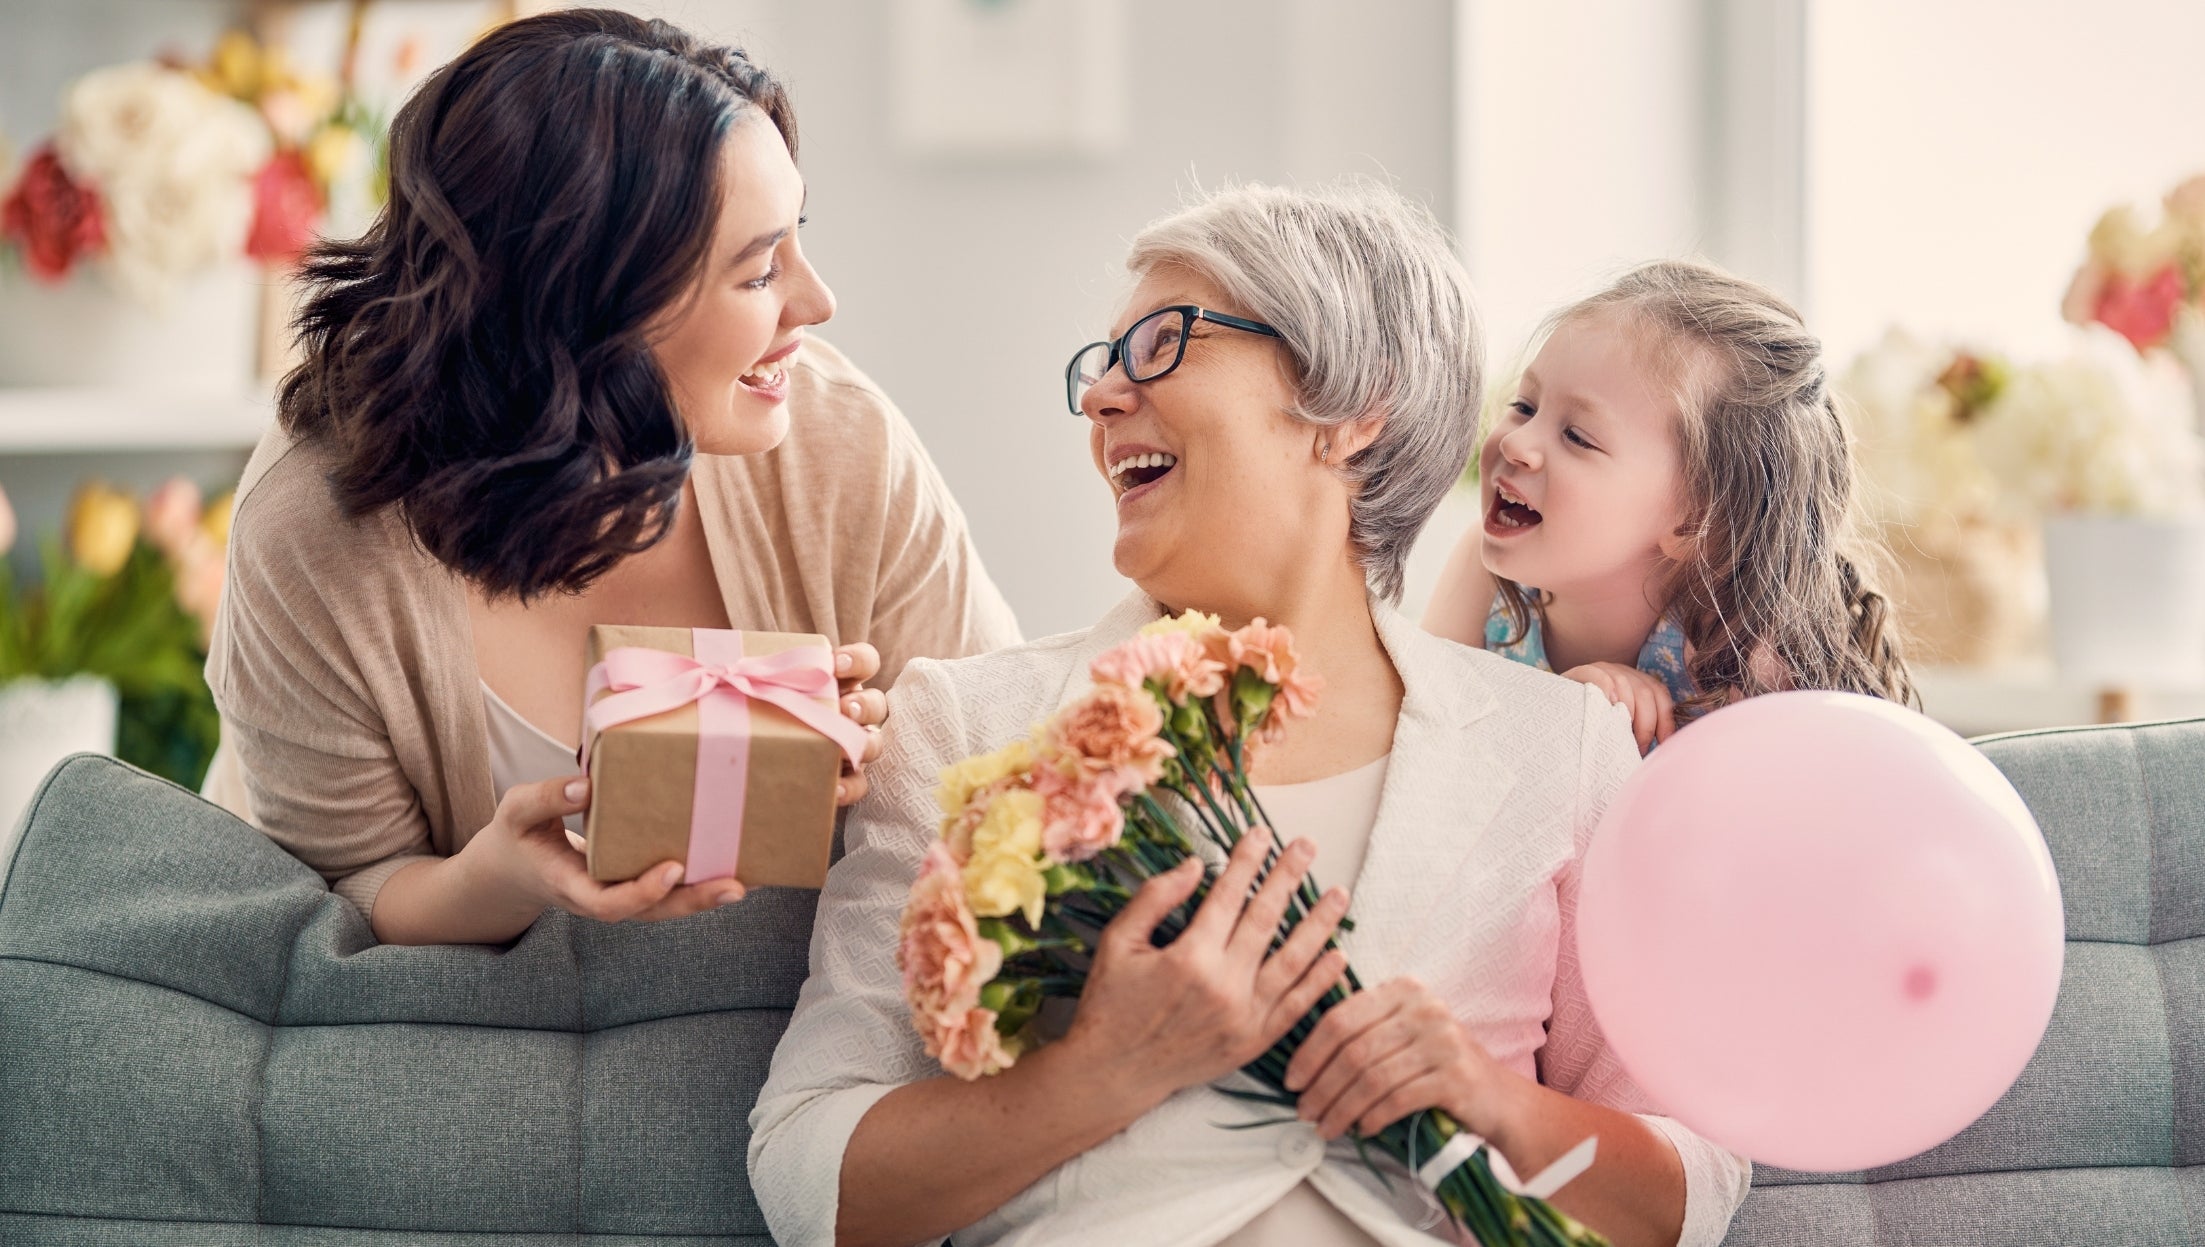 Best Mother's Day Gifts 2023 - Thoughtful and Heartfelt Gift Ideas for Mom